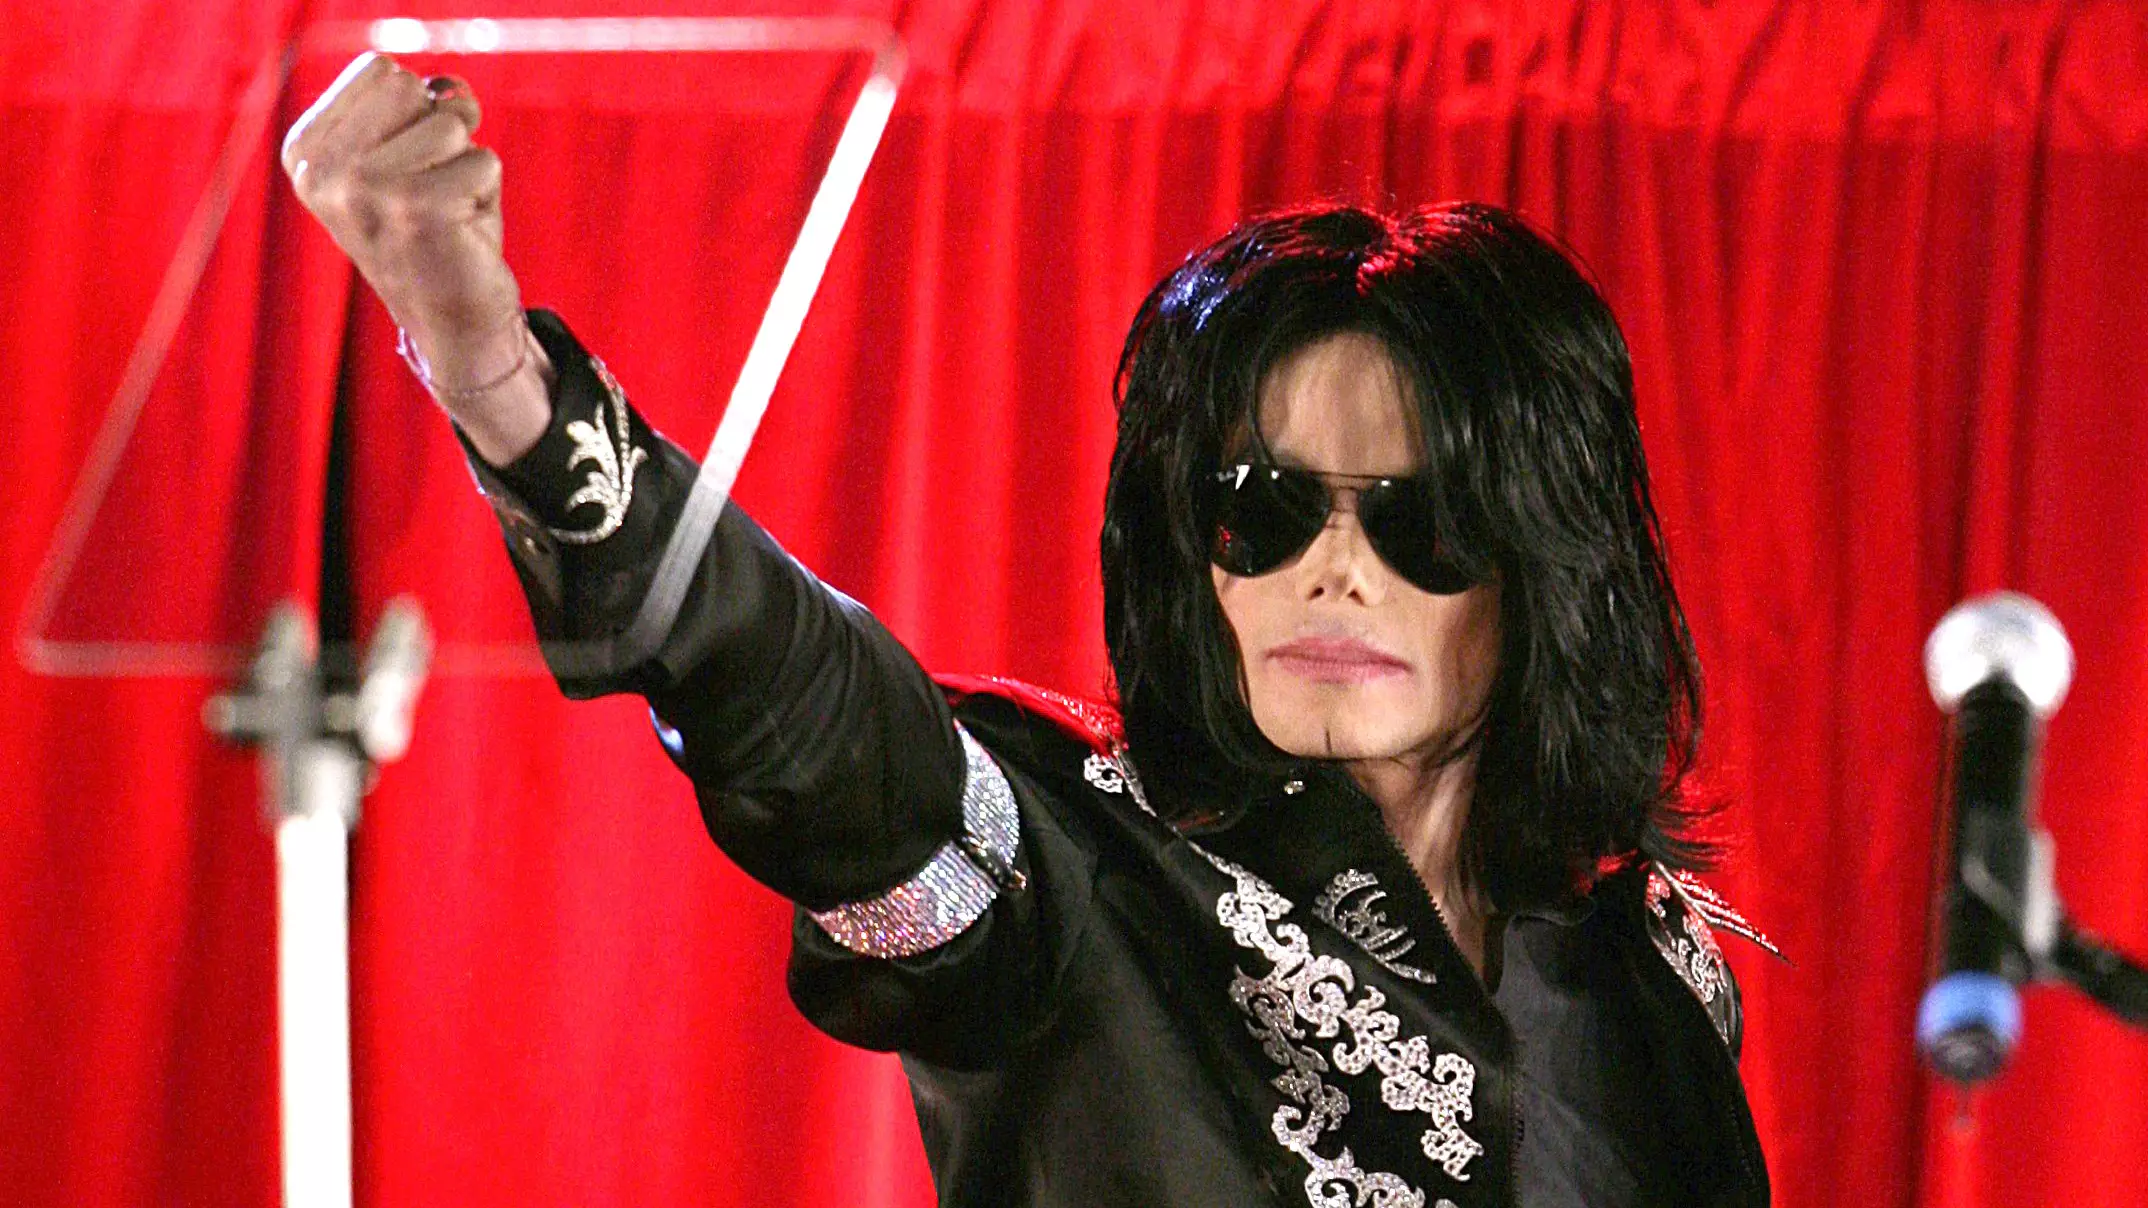 Michael Jackson Film Leaving Neverland To Air On Channel 4 This March